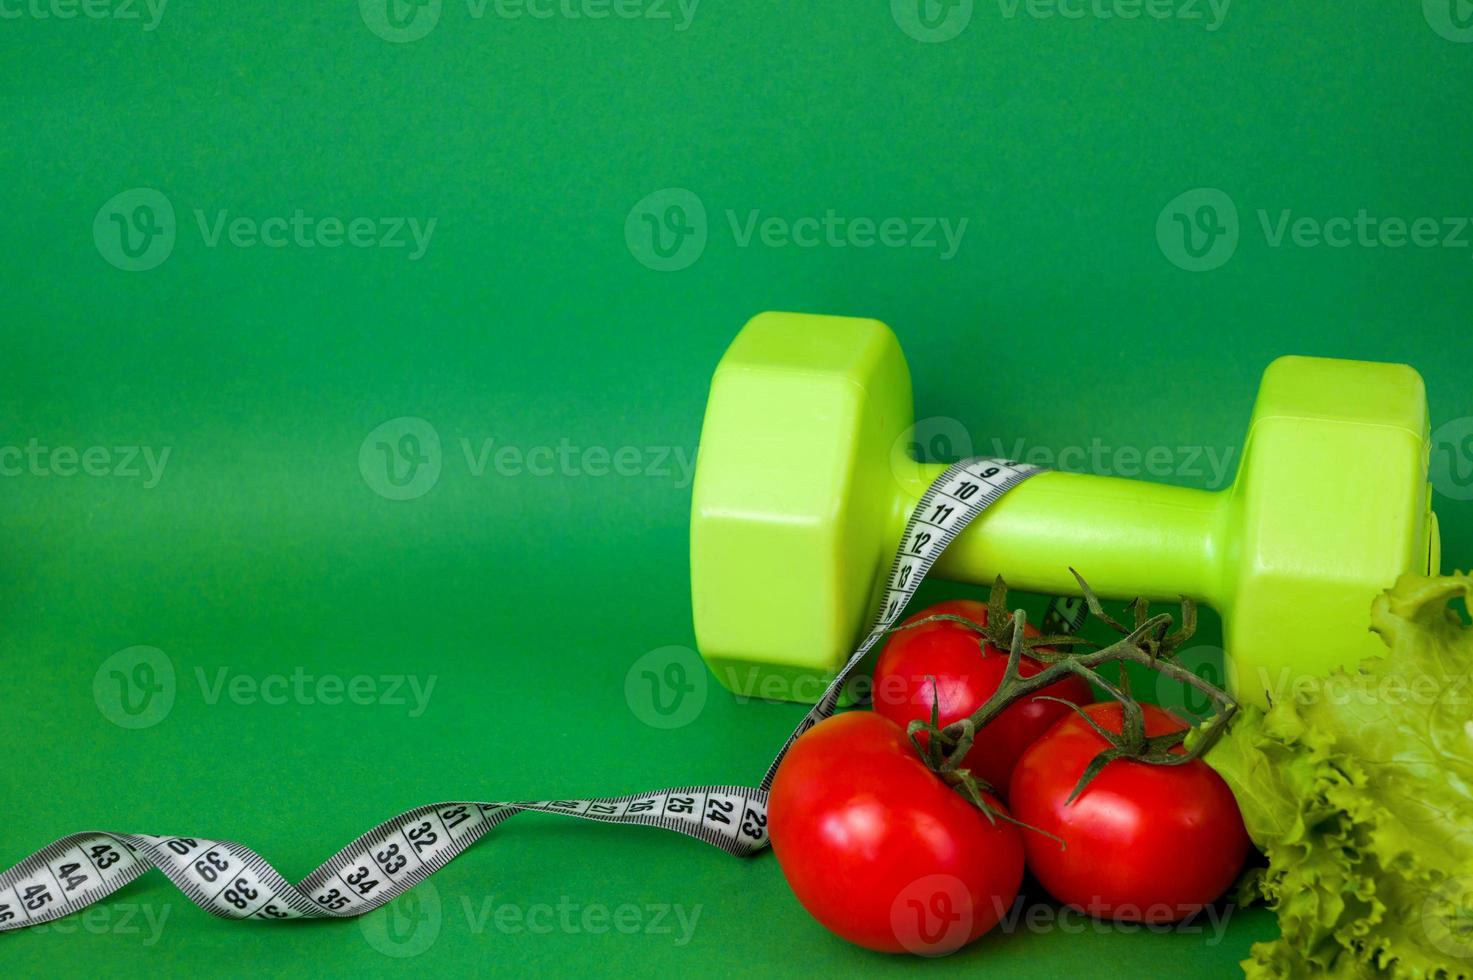 Side view of dumbbell against green background near measring tape. Workouts and sport concept. Healthy lifestyle.Vegetables photo